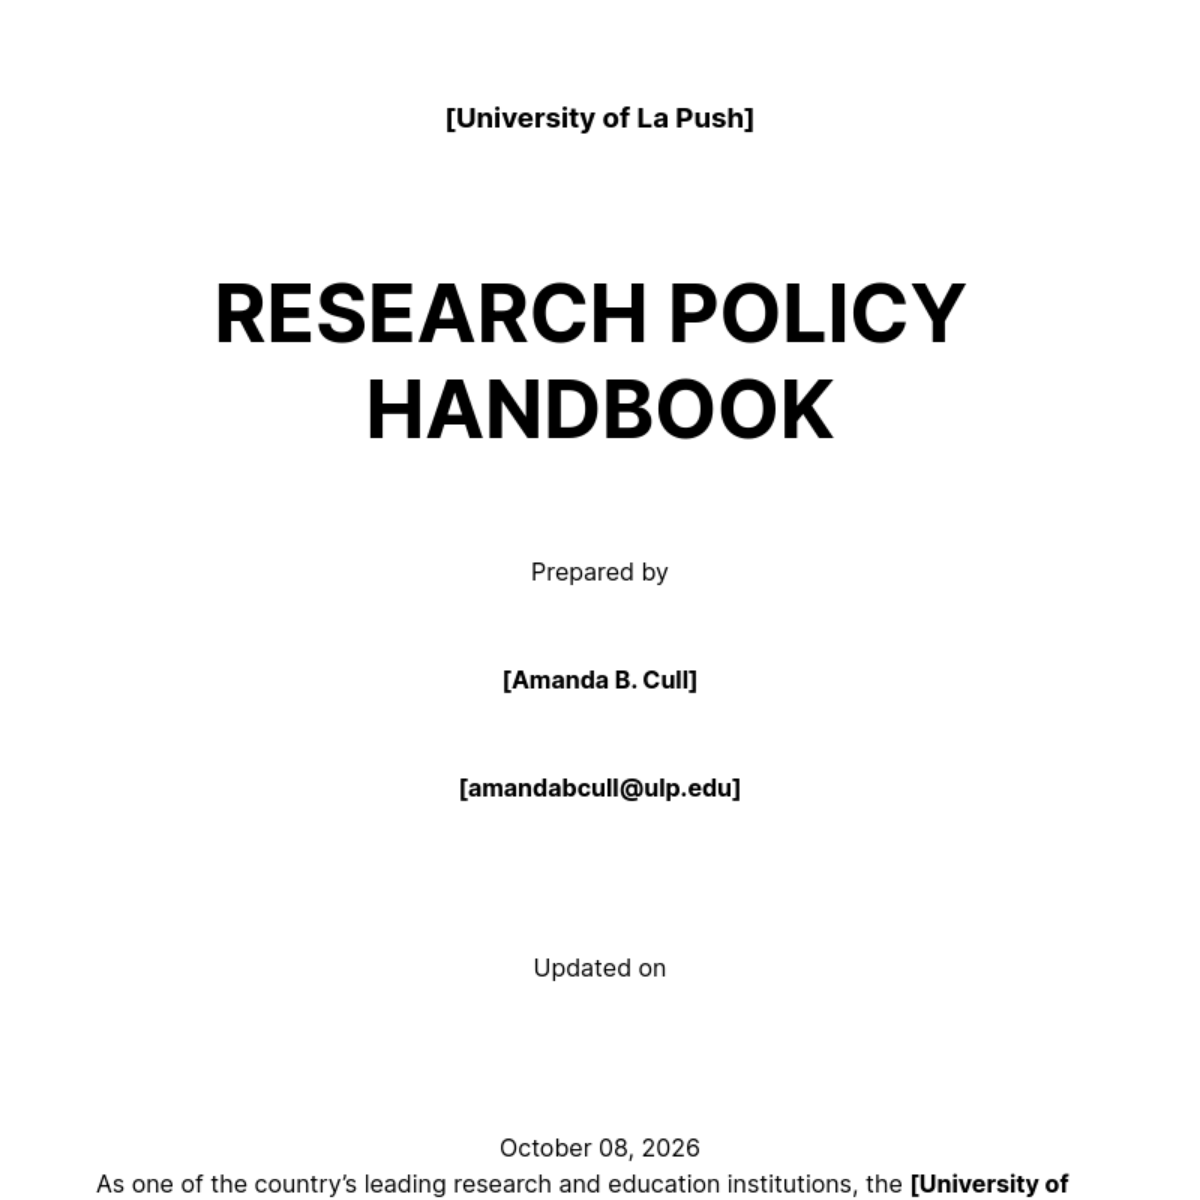 Research Policy Handbook Template